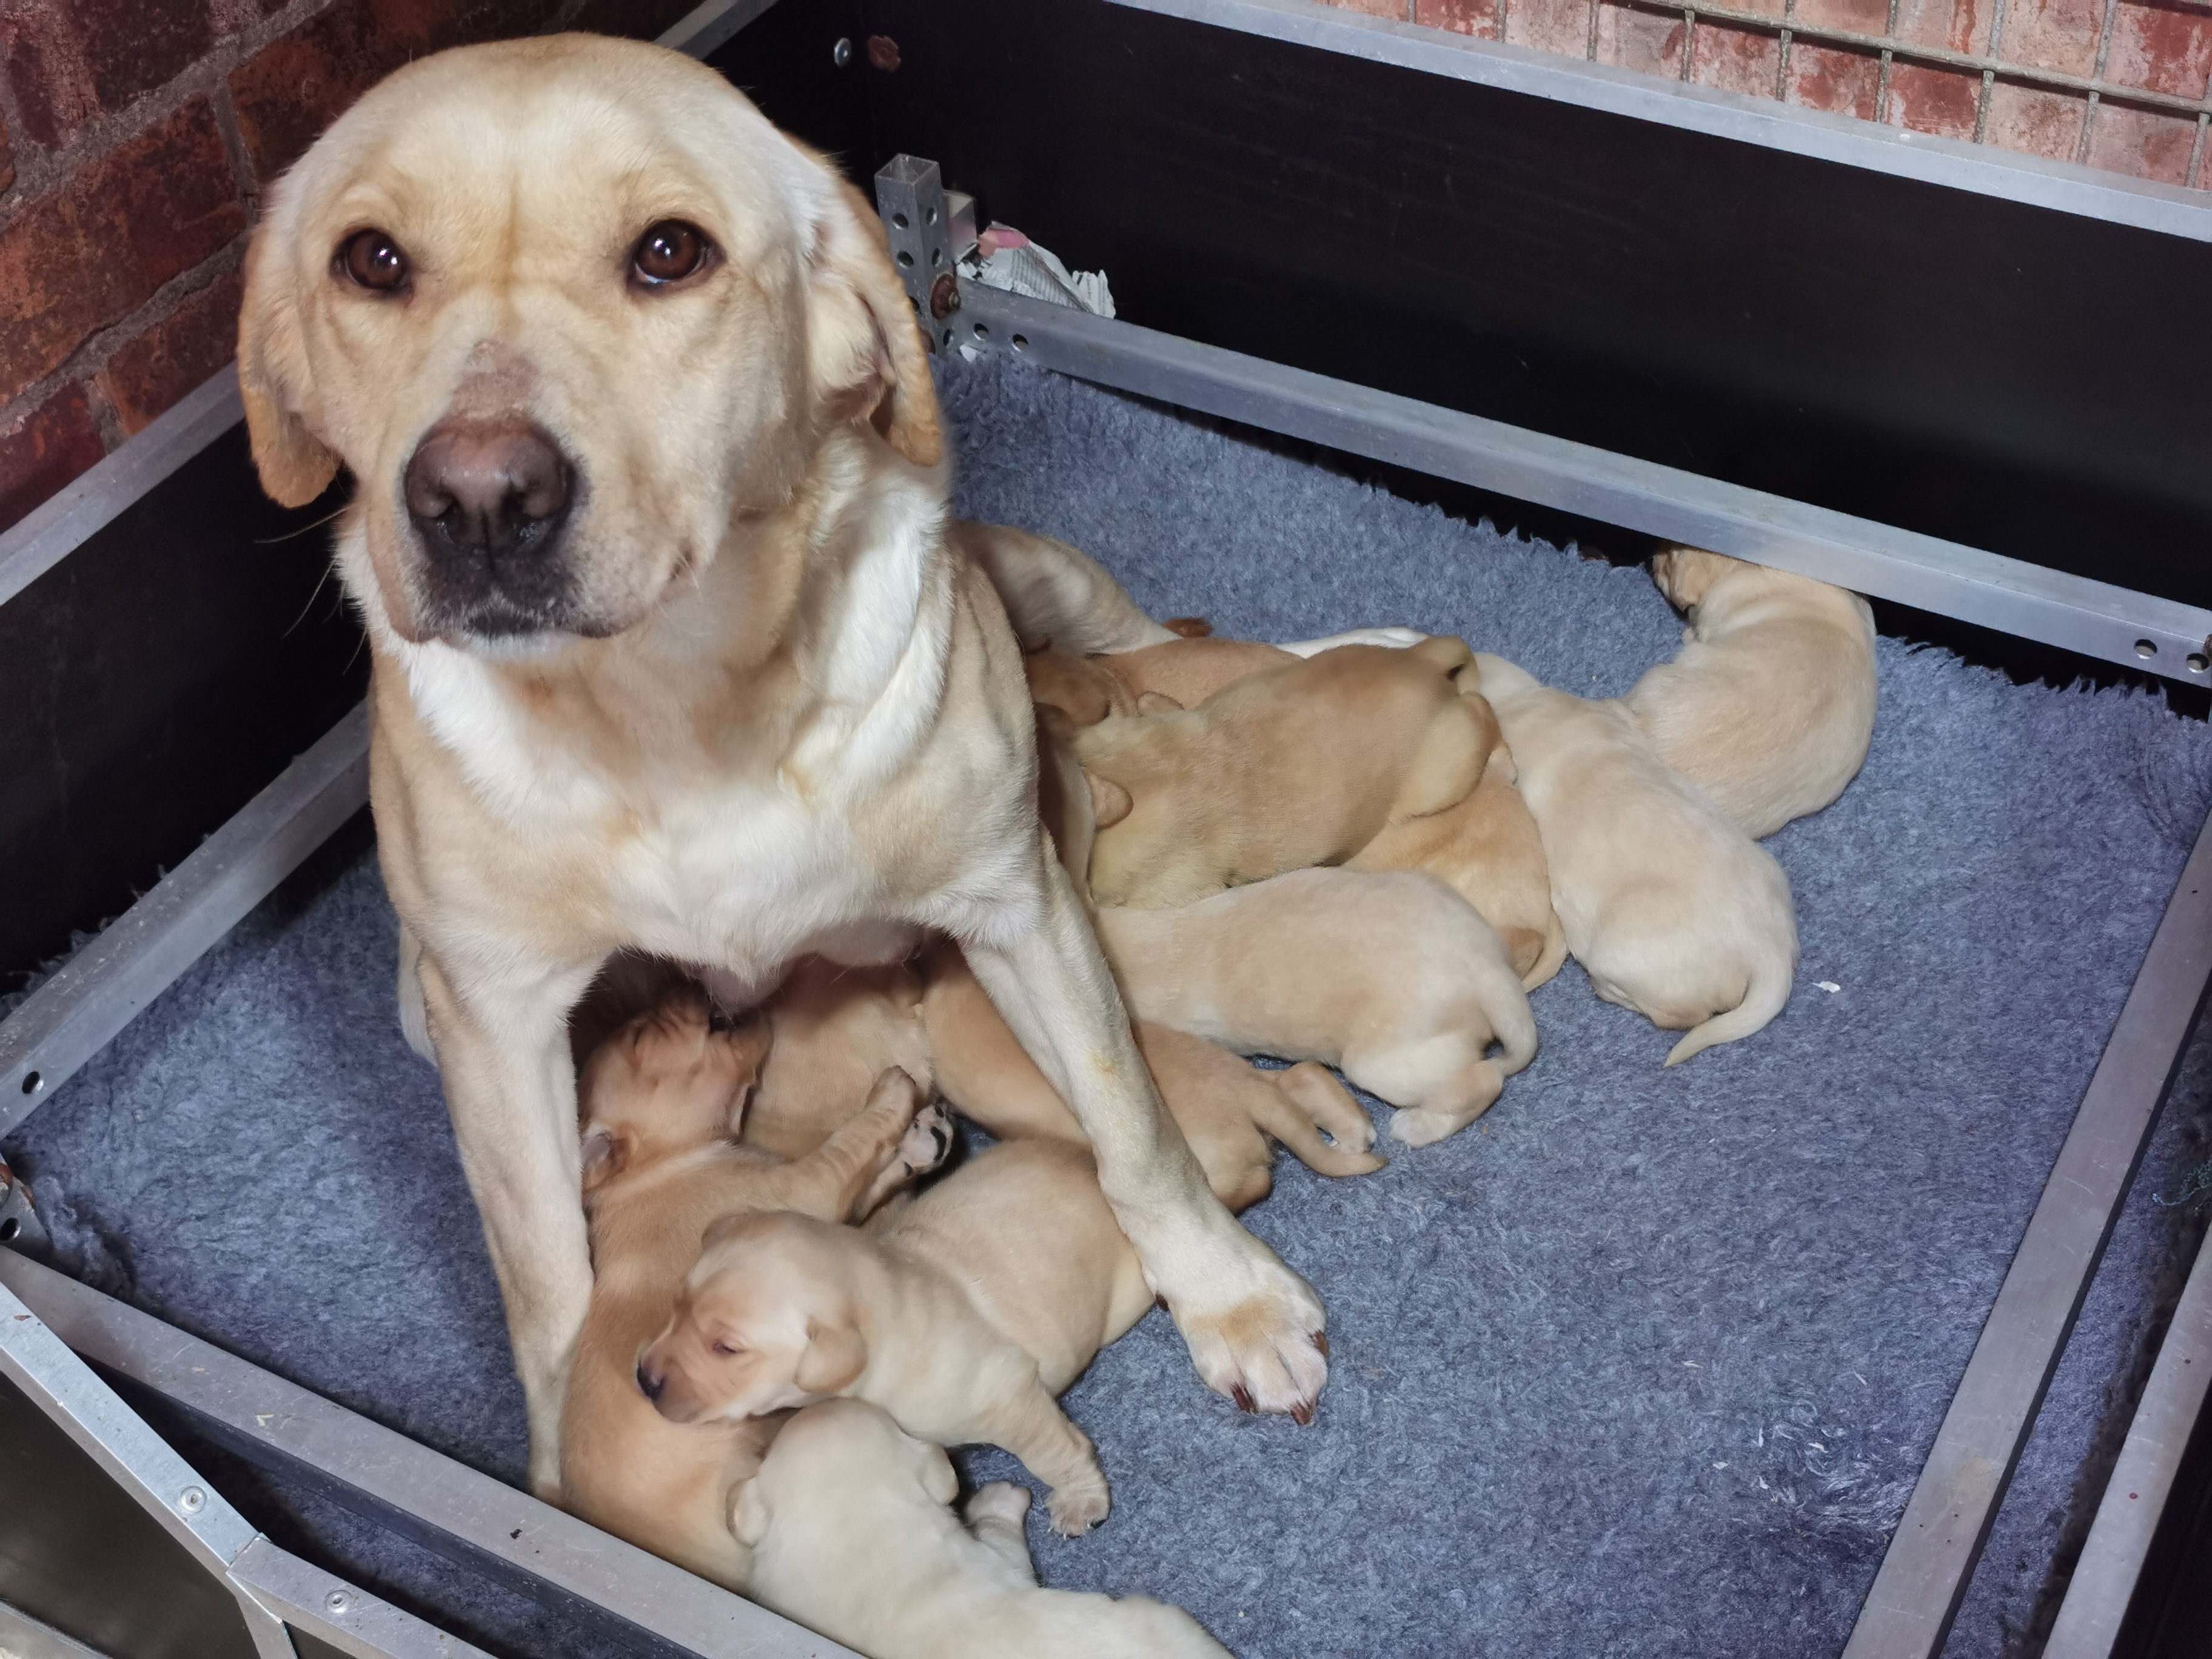 Mum and the pups